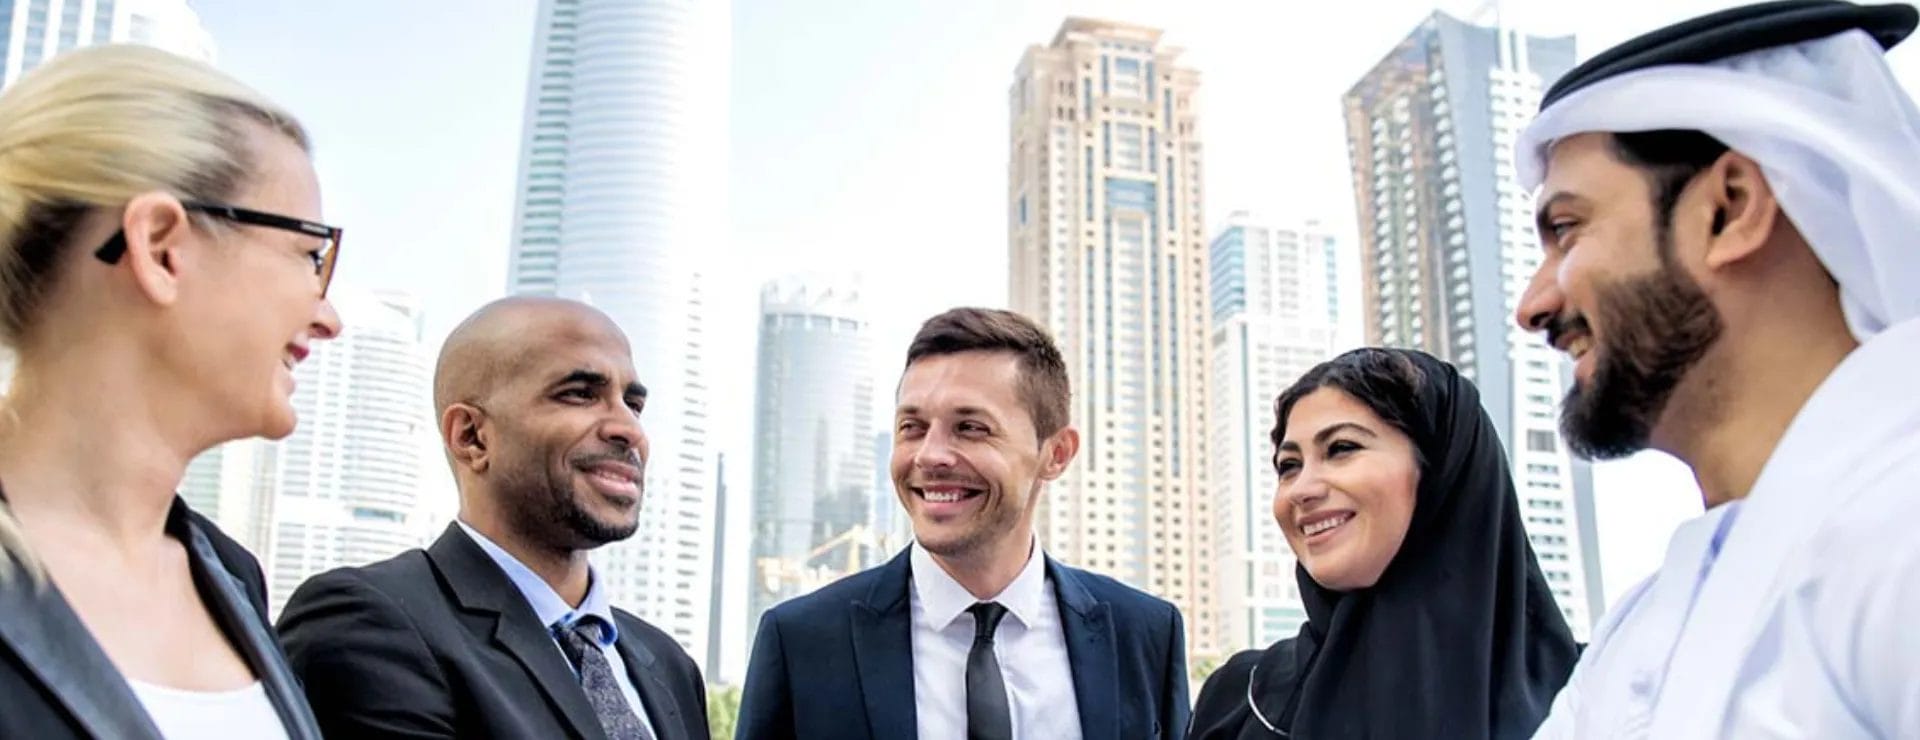 start business in the UAE